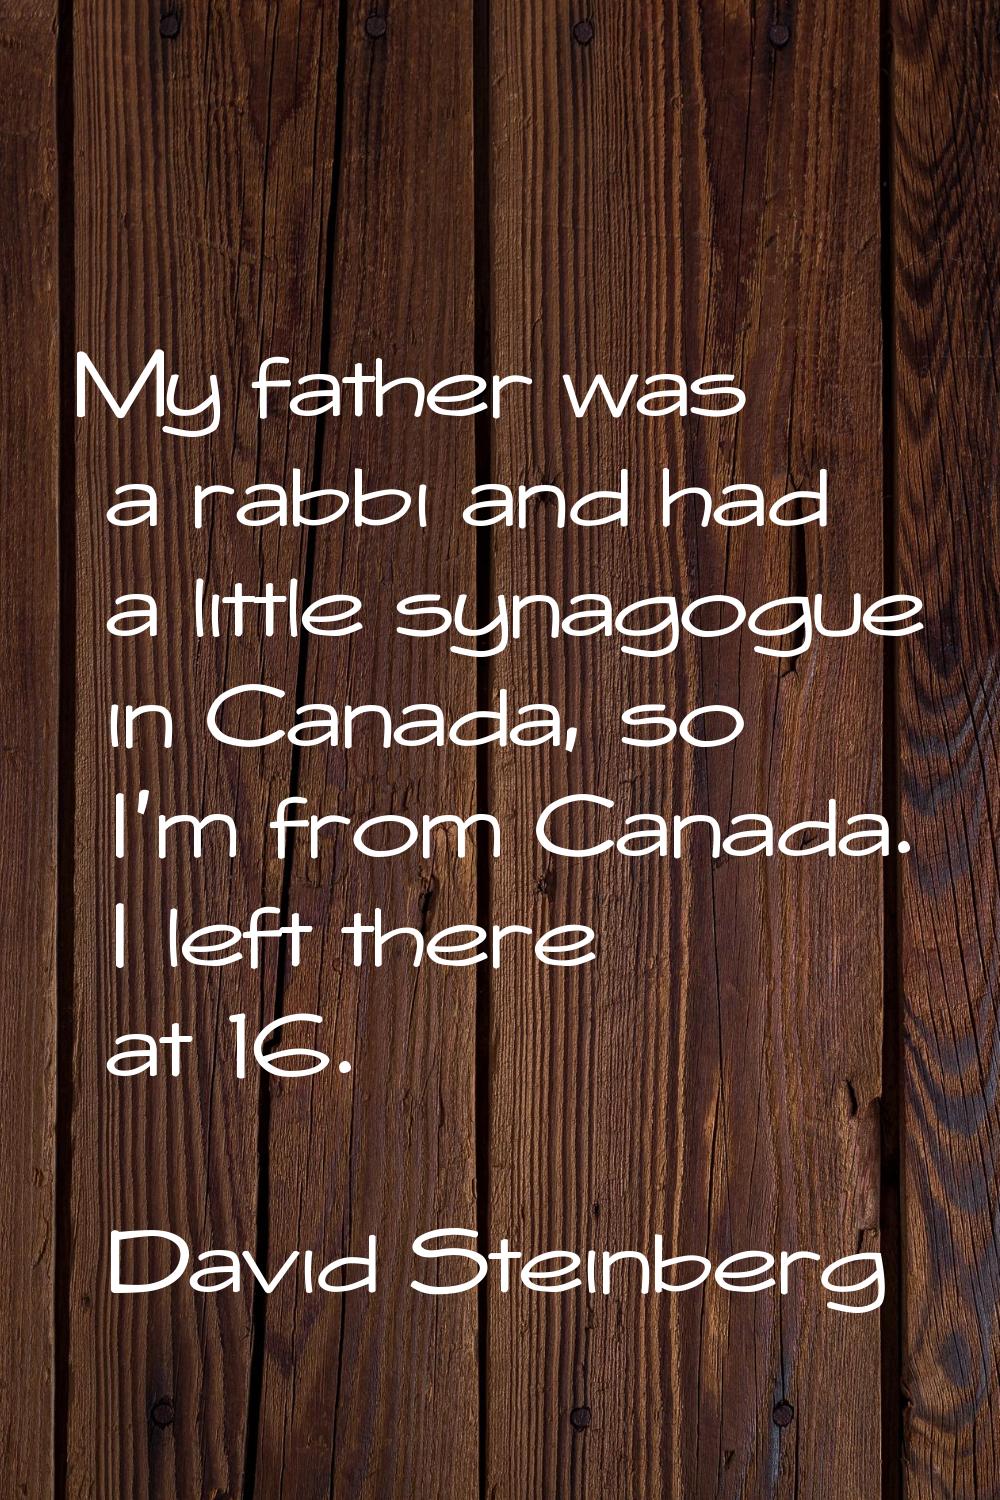 My father was a rabbi and had a little synagogue in Canada, so I'm from Canada. I left there at 16.